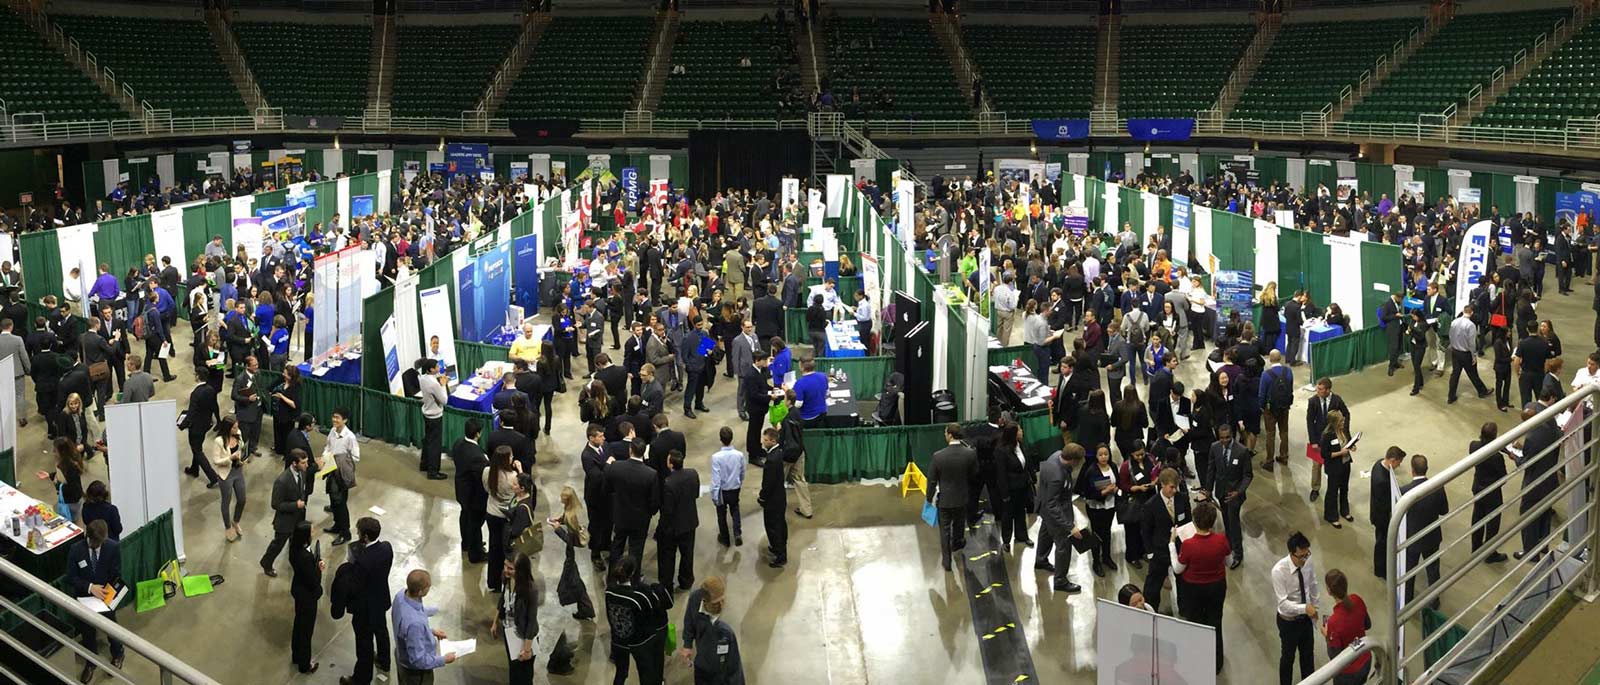 Hundreds of students and recruiters mingle on the floor of the Breslin Student Events Center at a recruiting fair